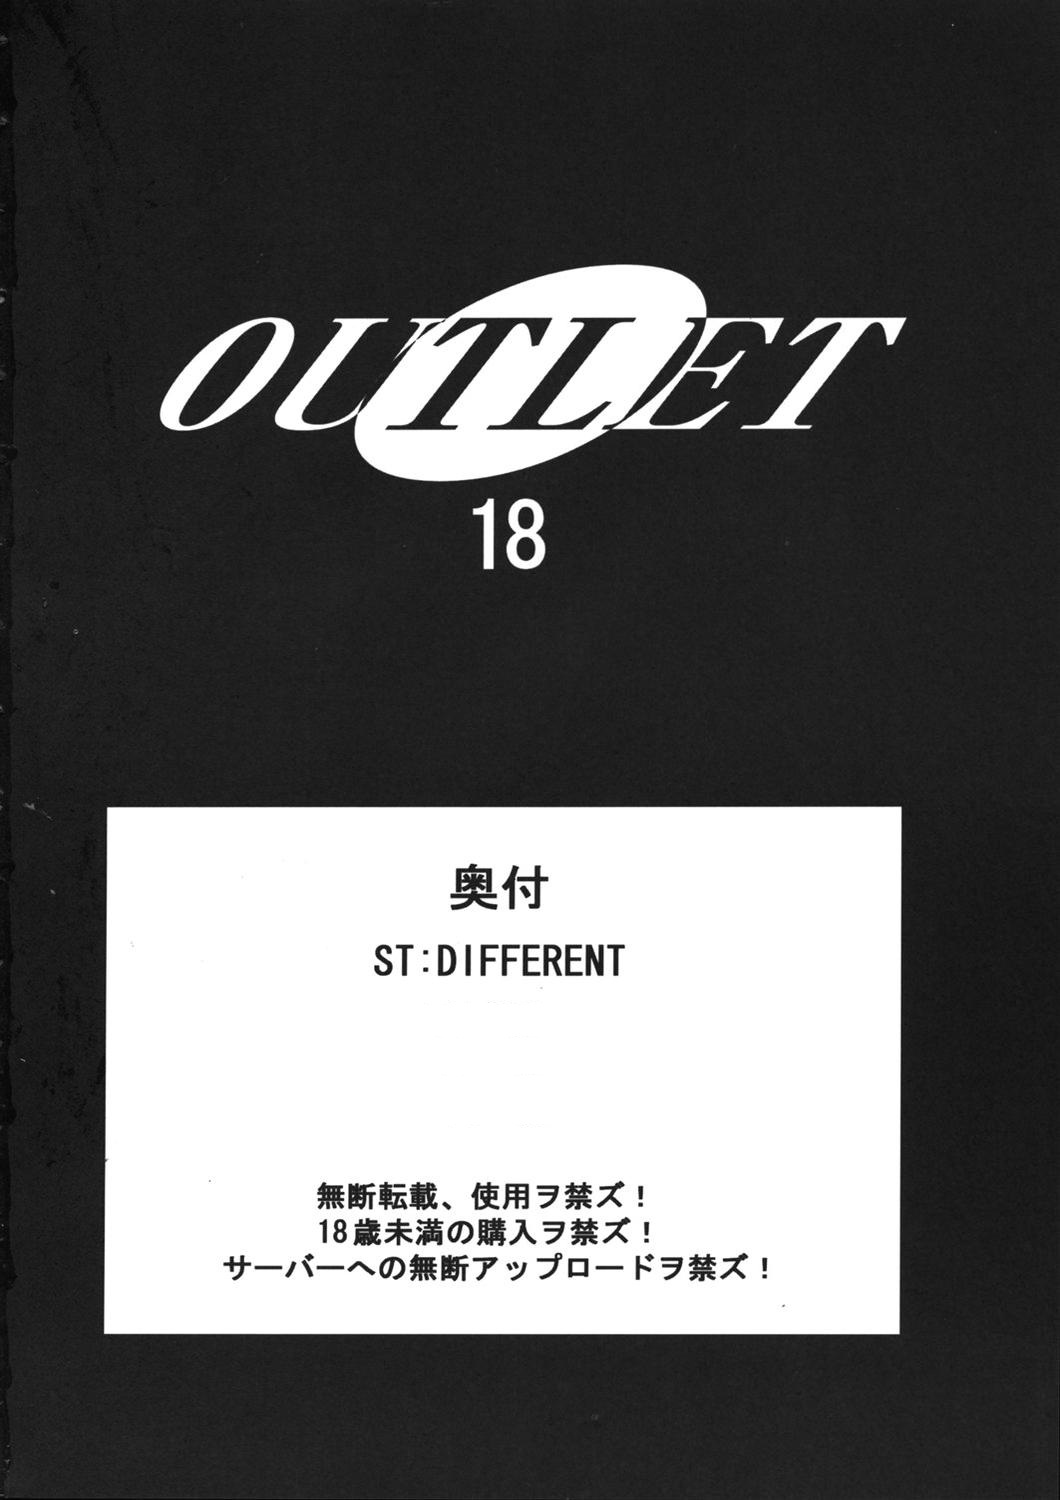 (C66) [ST:DIFFERENT (よろず)] OUTLET 18 (いちご100%)